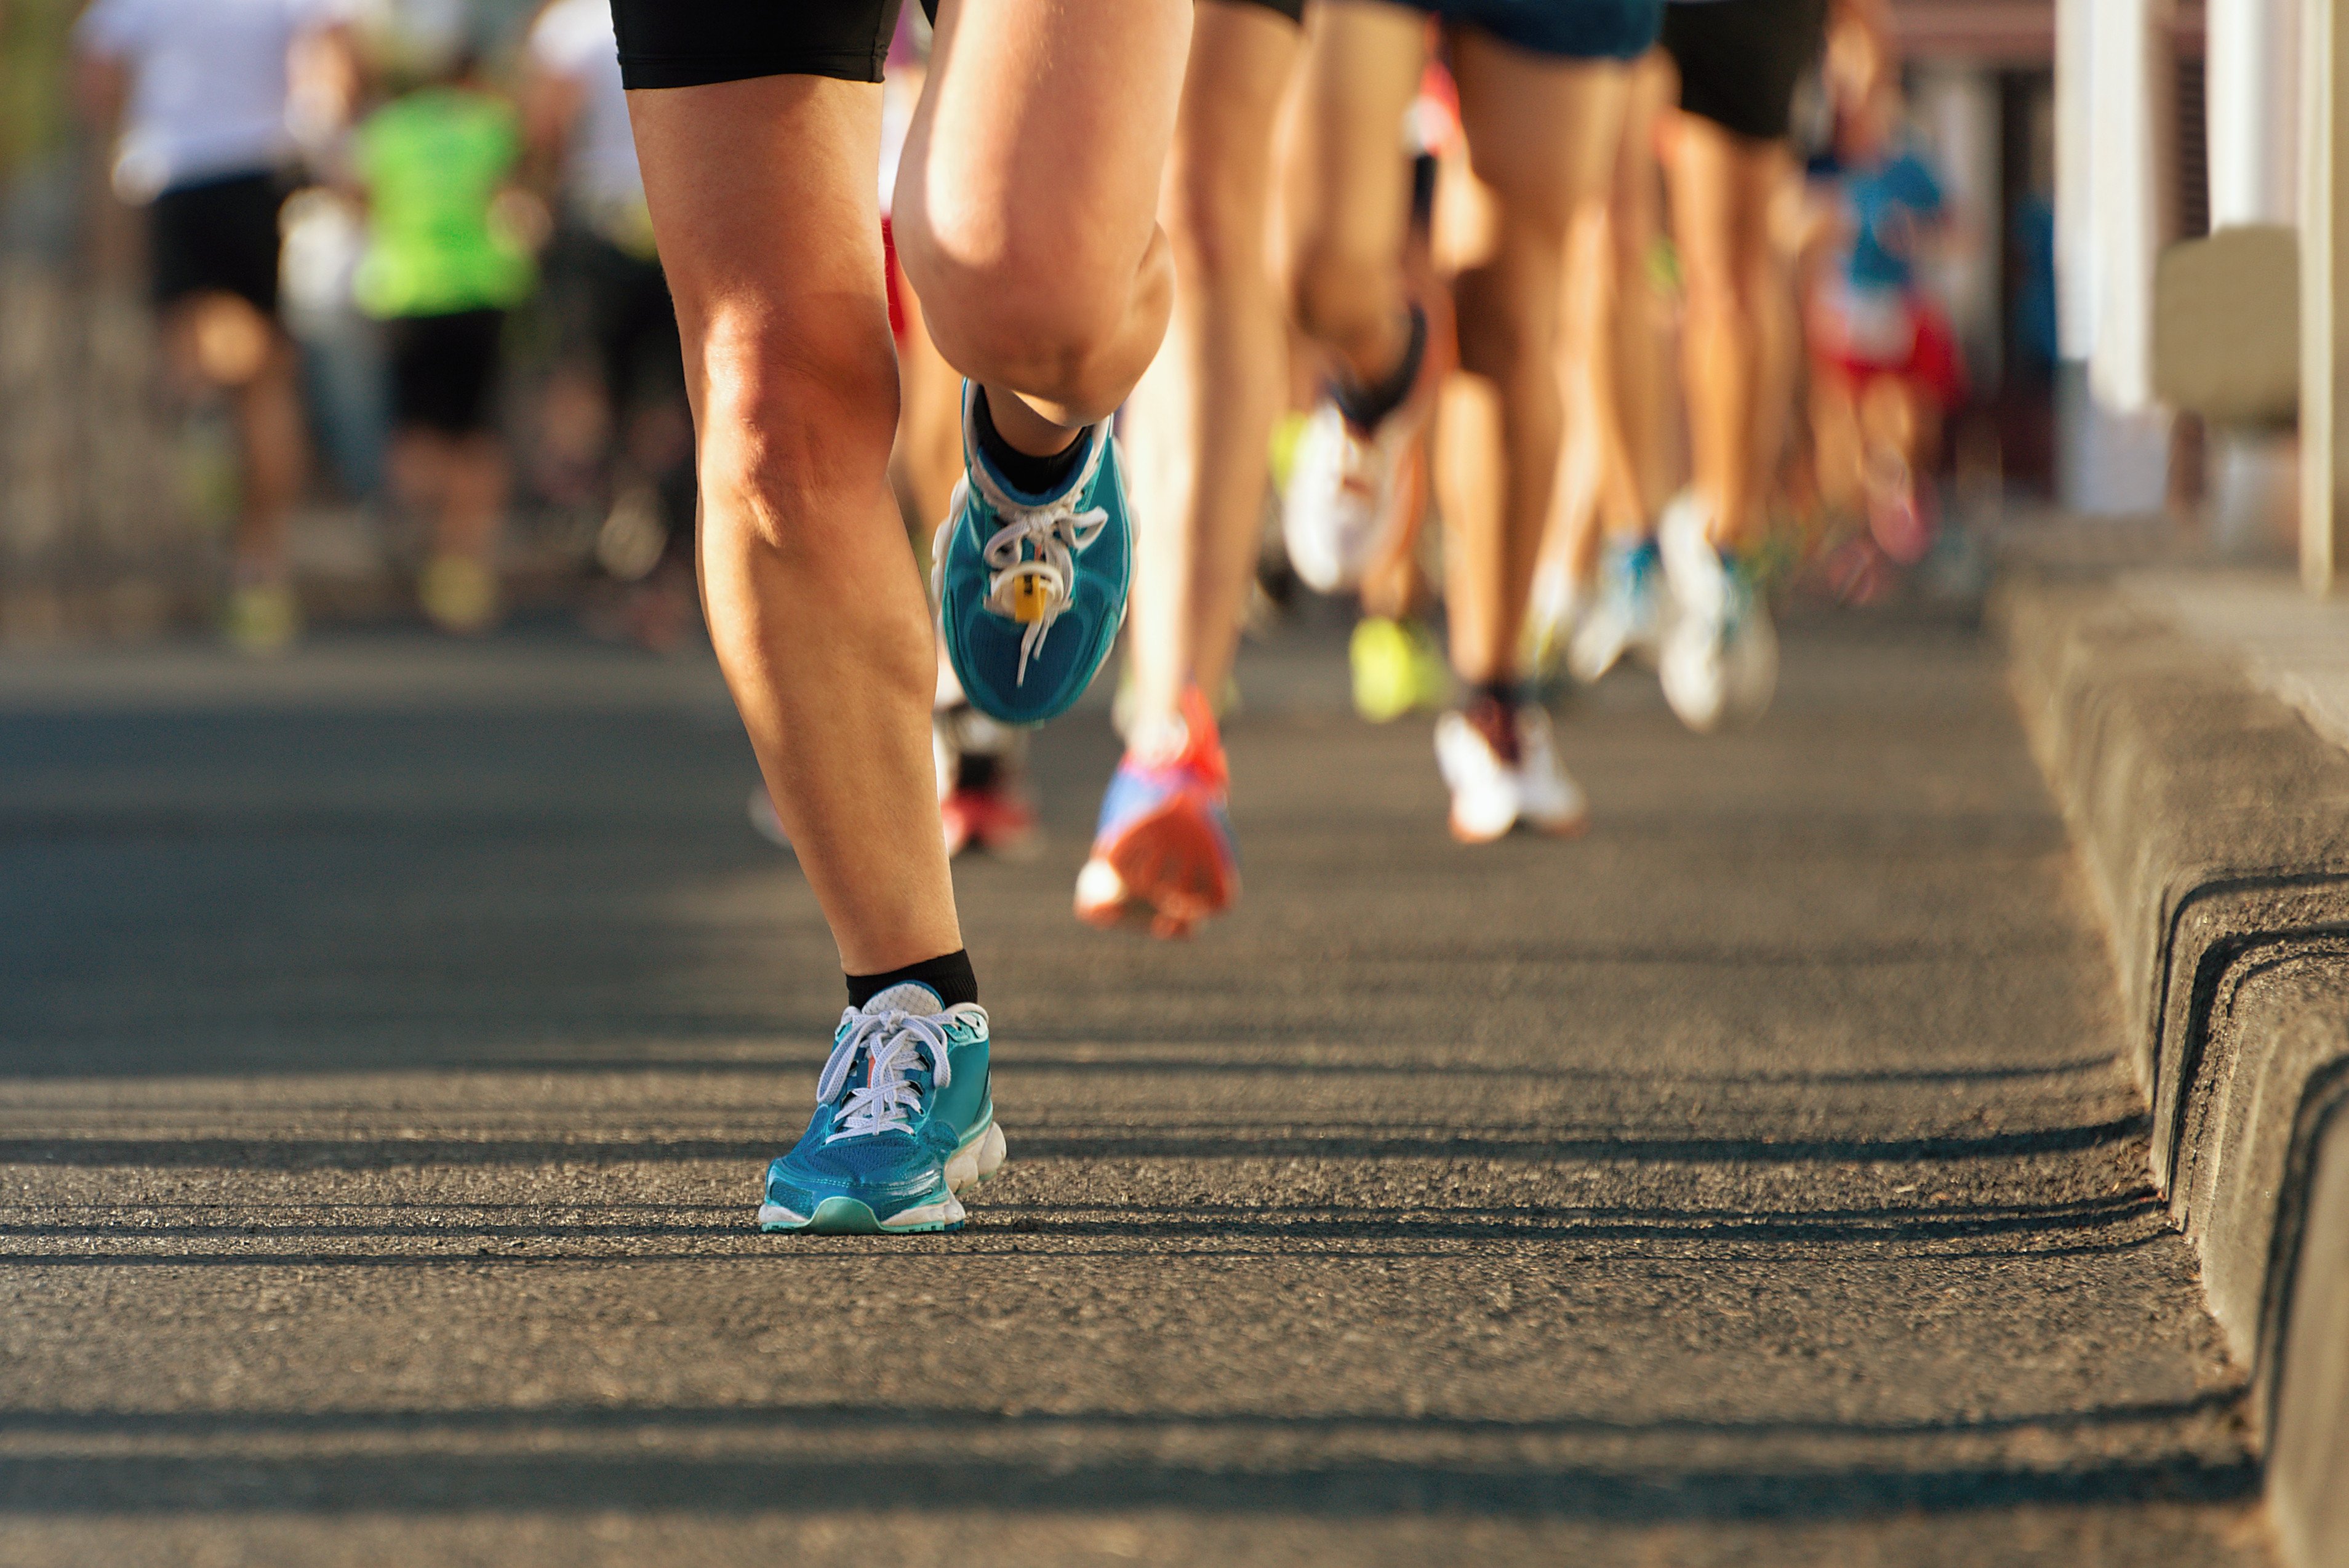 A new study shows no causal link between marathon runners’ running history and osteoarthritis, adding to a growing body of evidence undermining the notion that long-distance running damages the knees and hips. Photo: Shutterstock